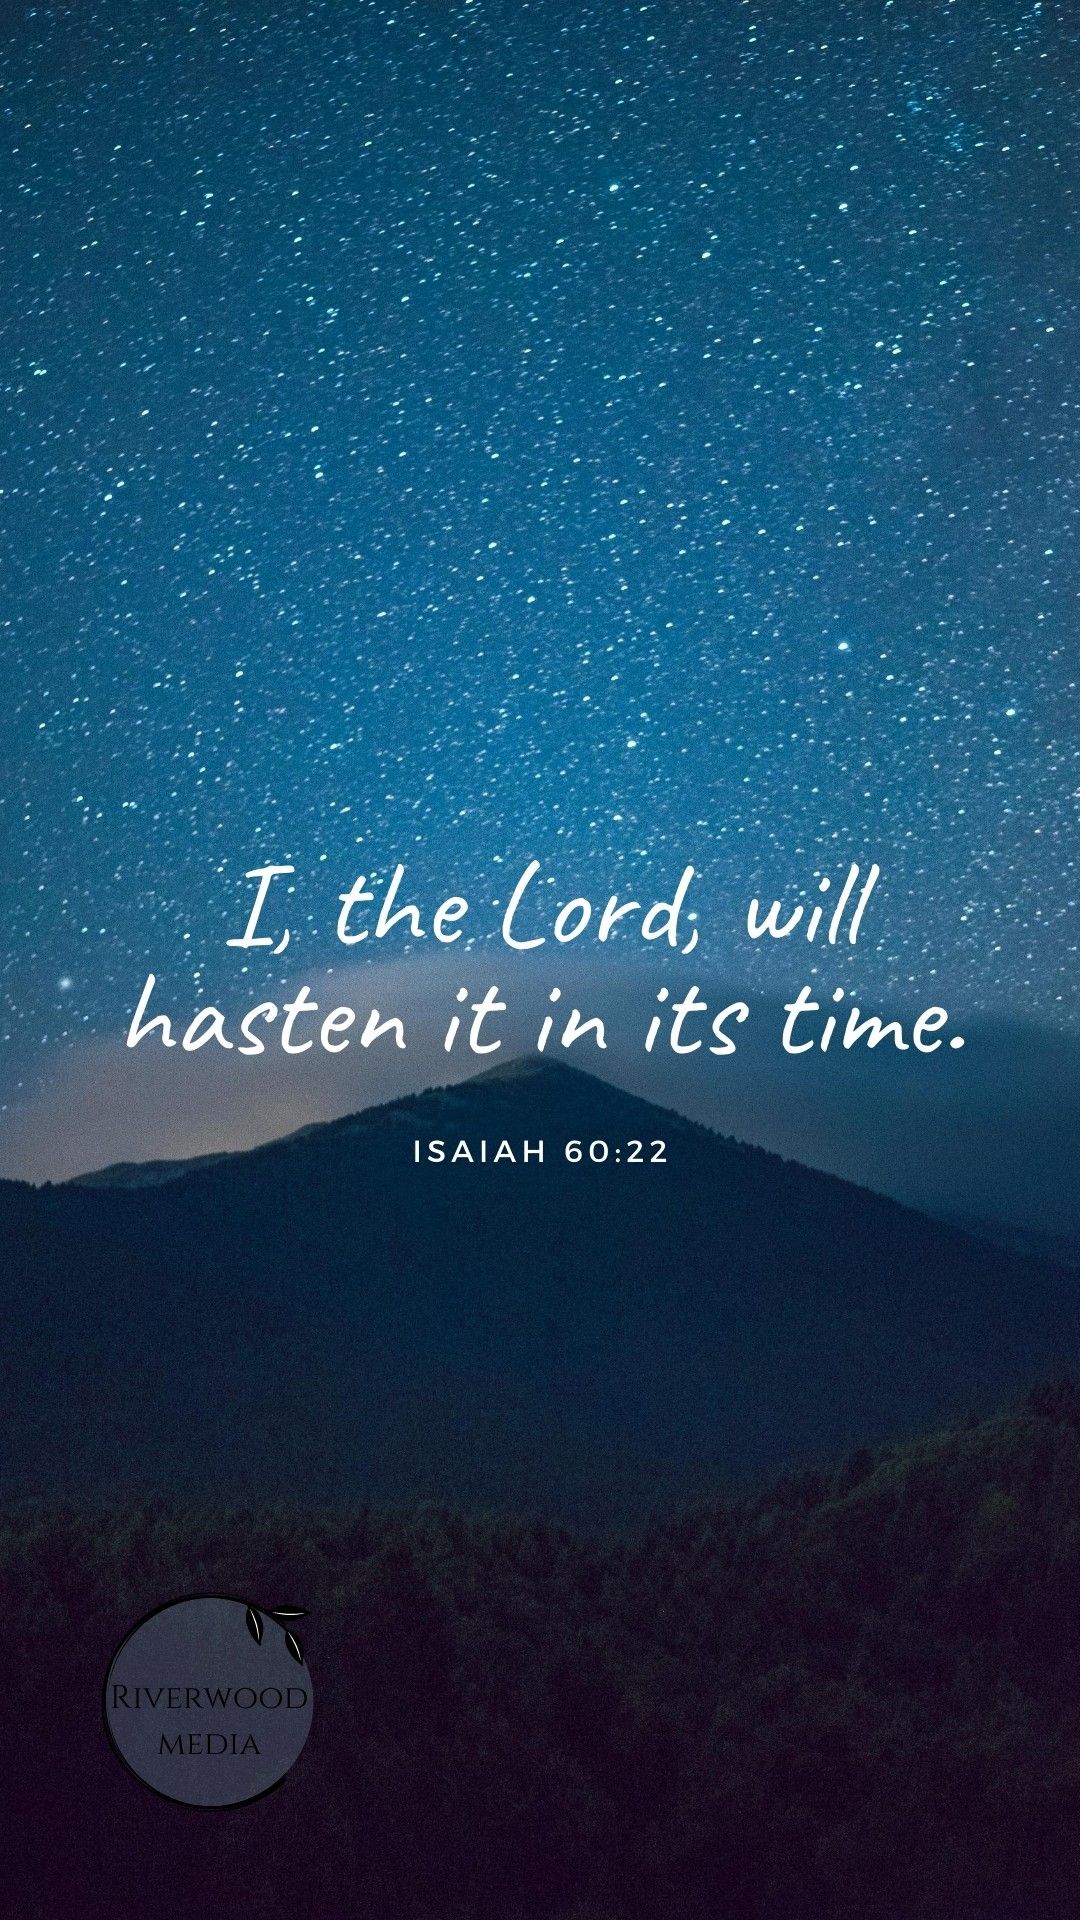 Isaiah 60:22 In its time. Isaiah 60 Faith quotes, Isaiah